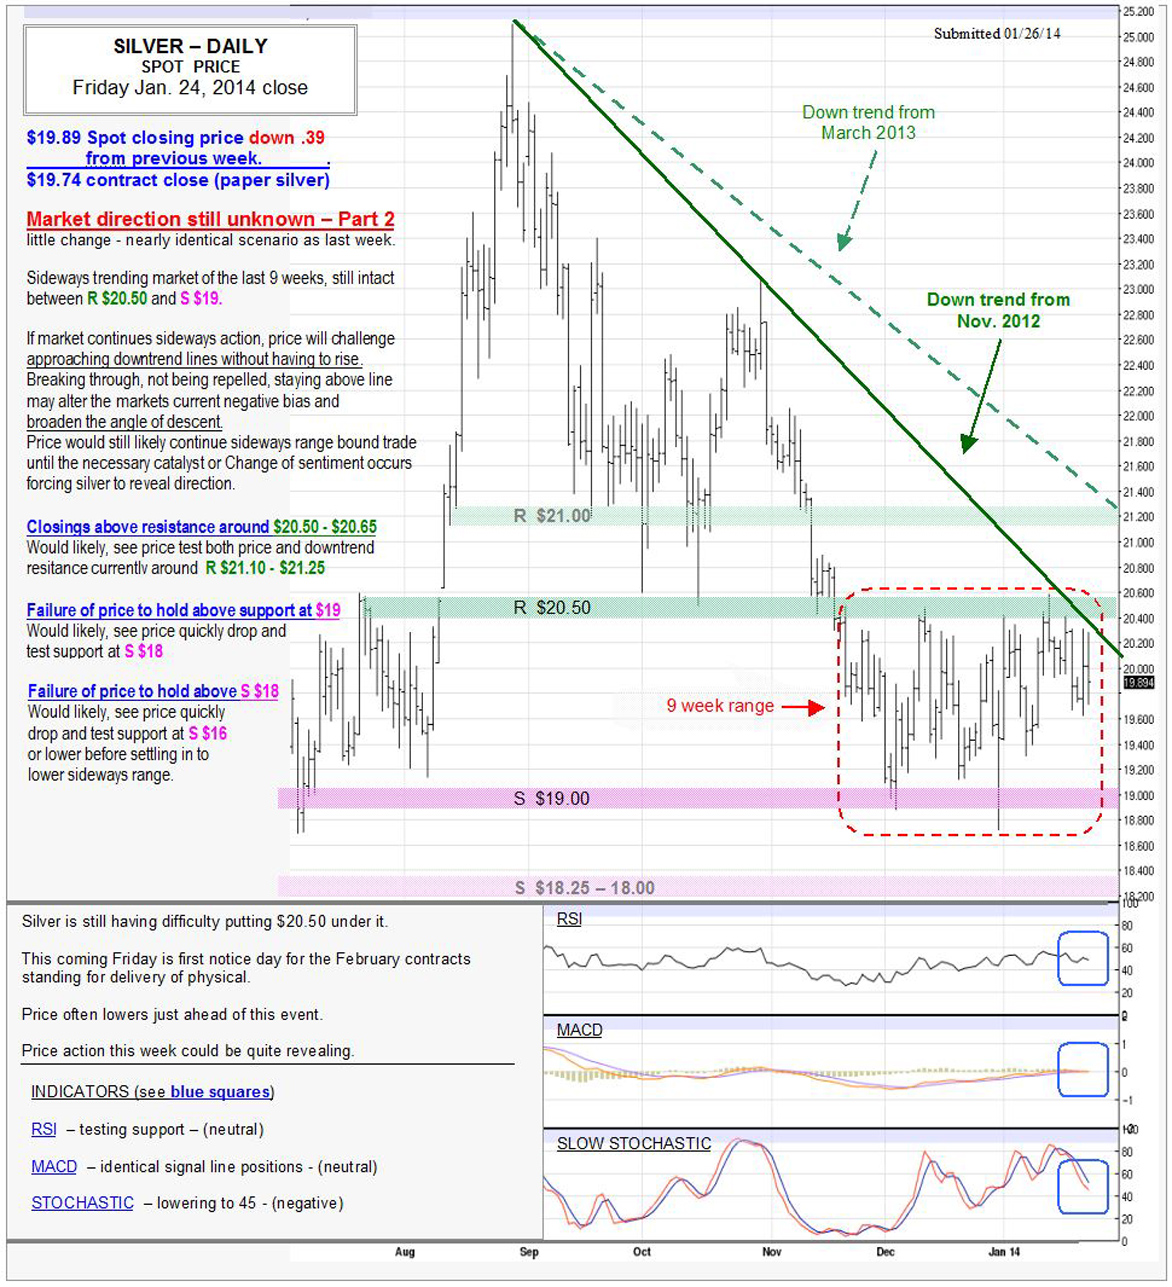 Jan 24, 2014 chart & commentary